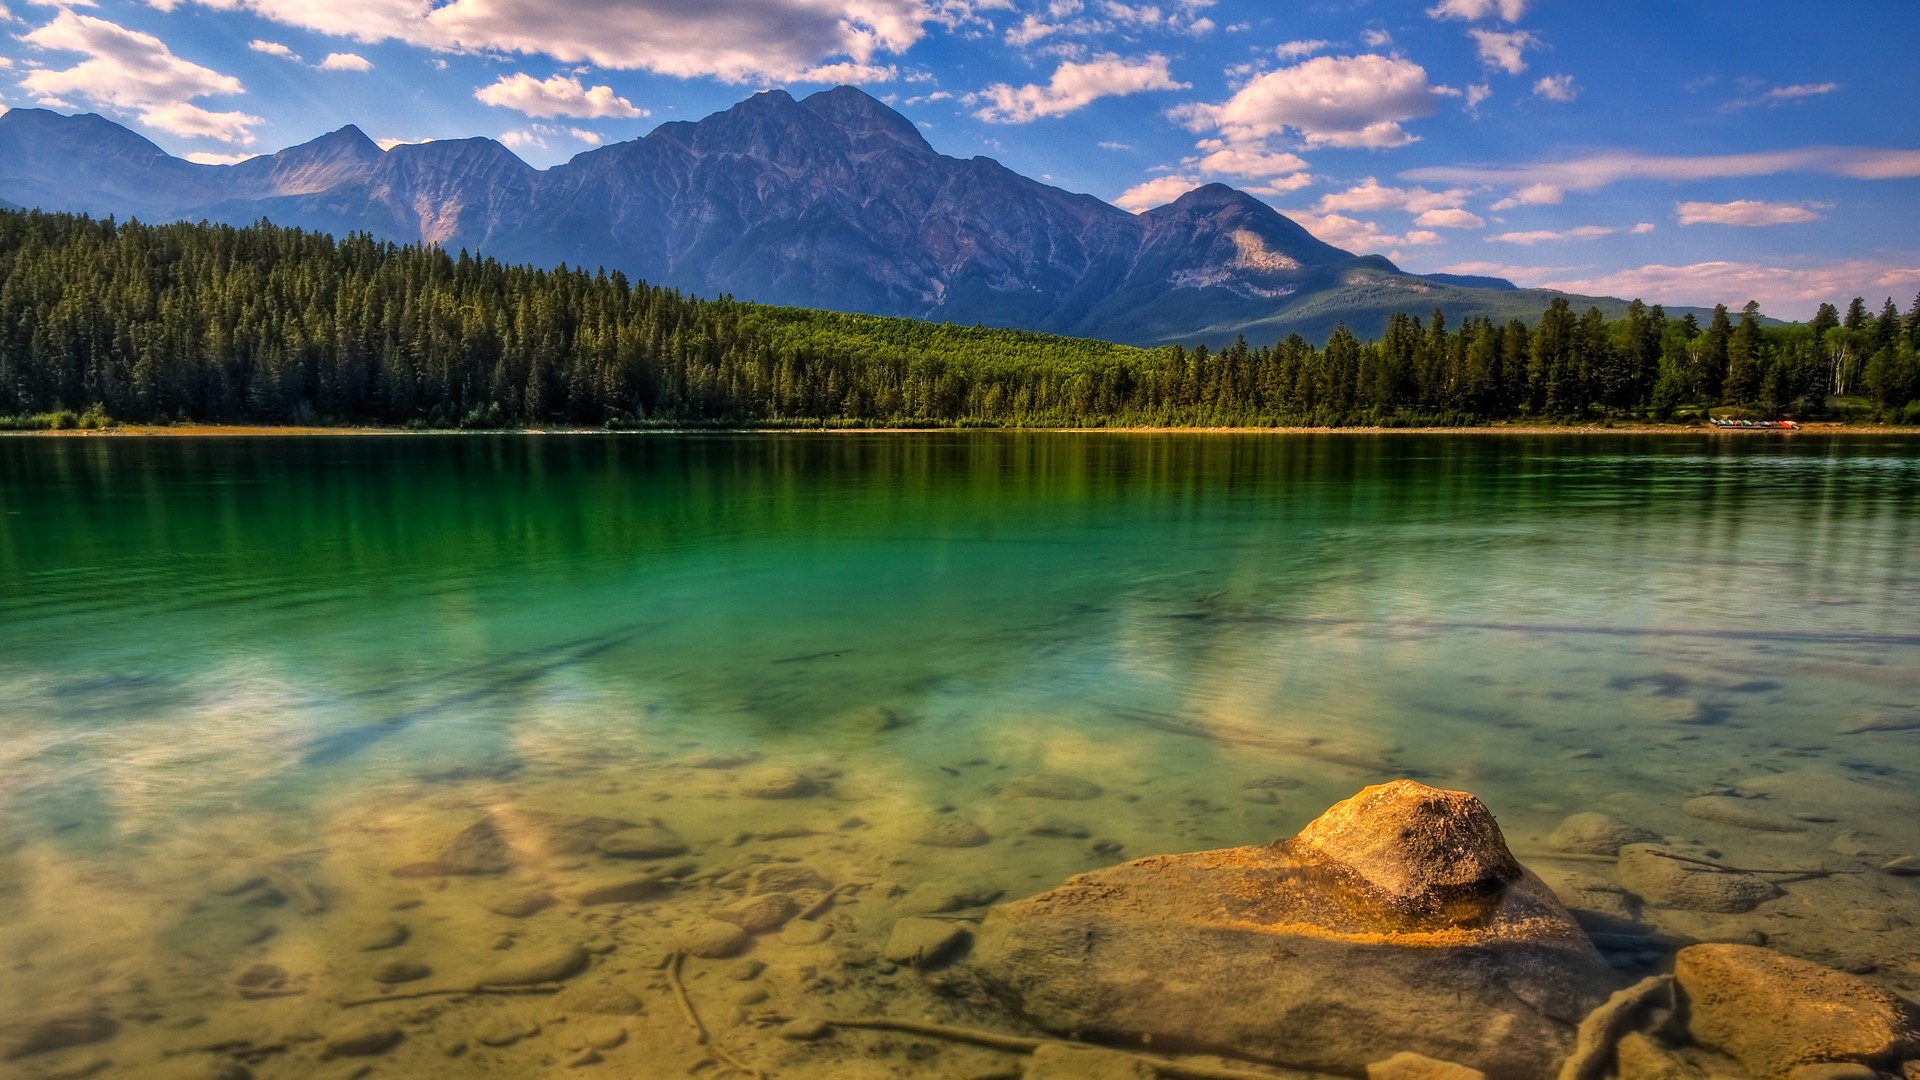 General 1920x1080 Canada clouds water mountains outdoors nature forest lake